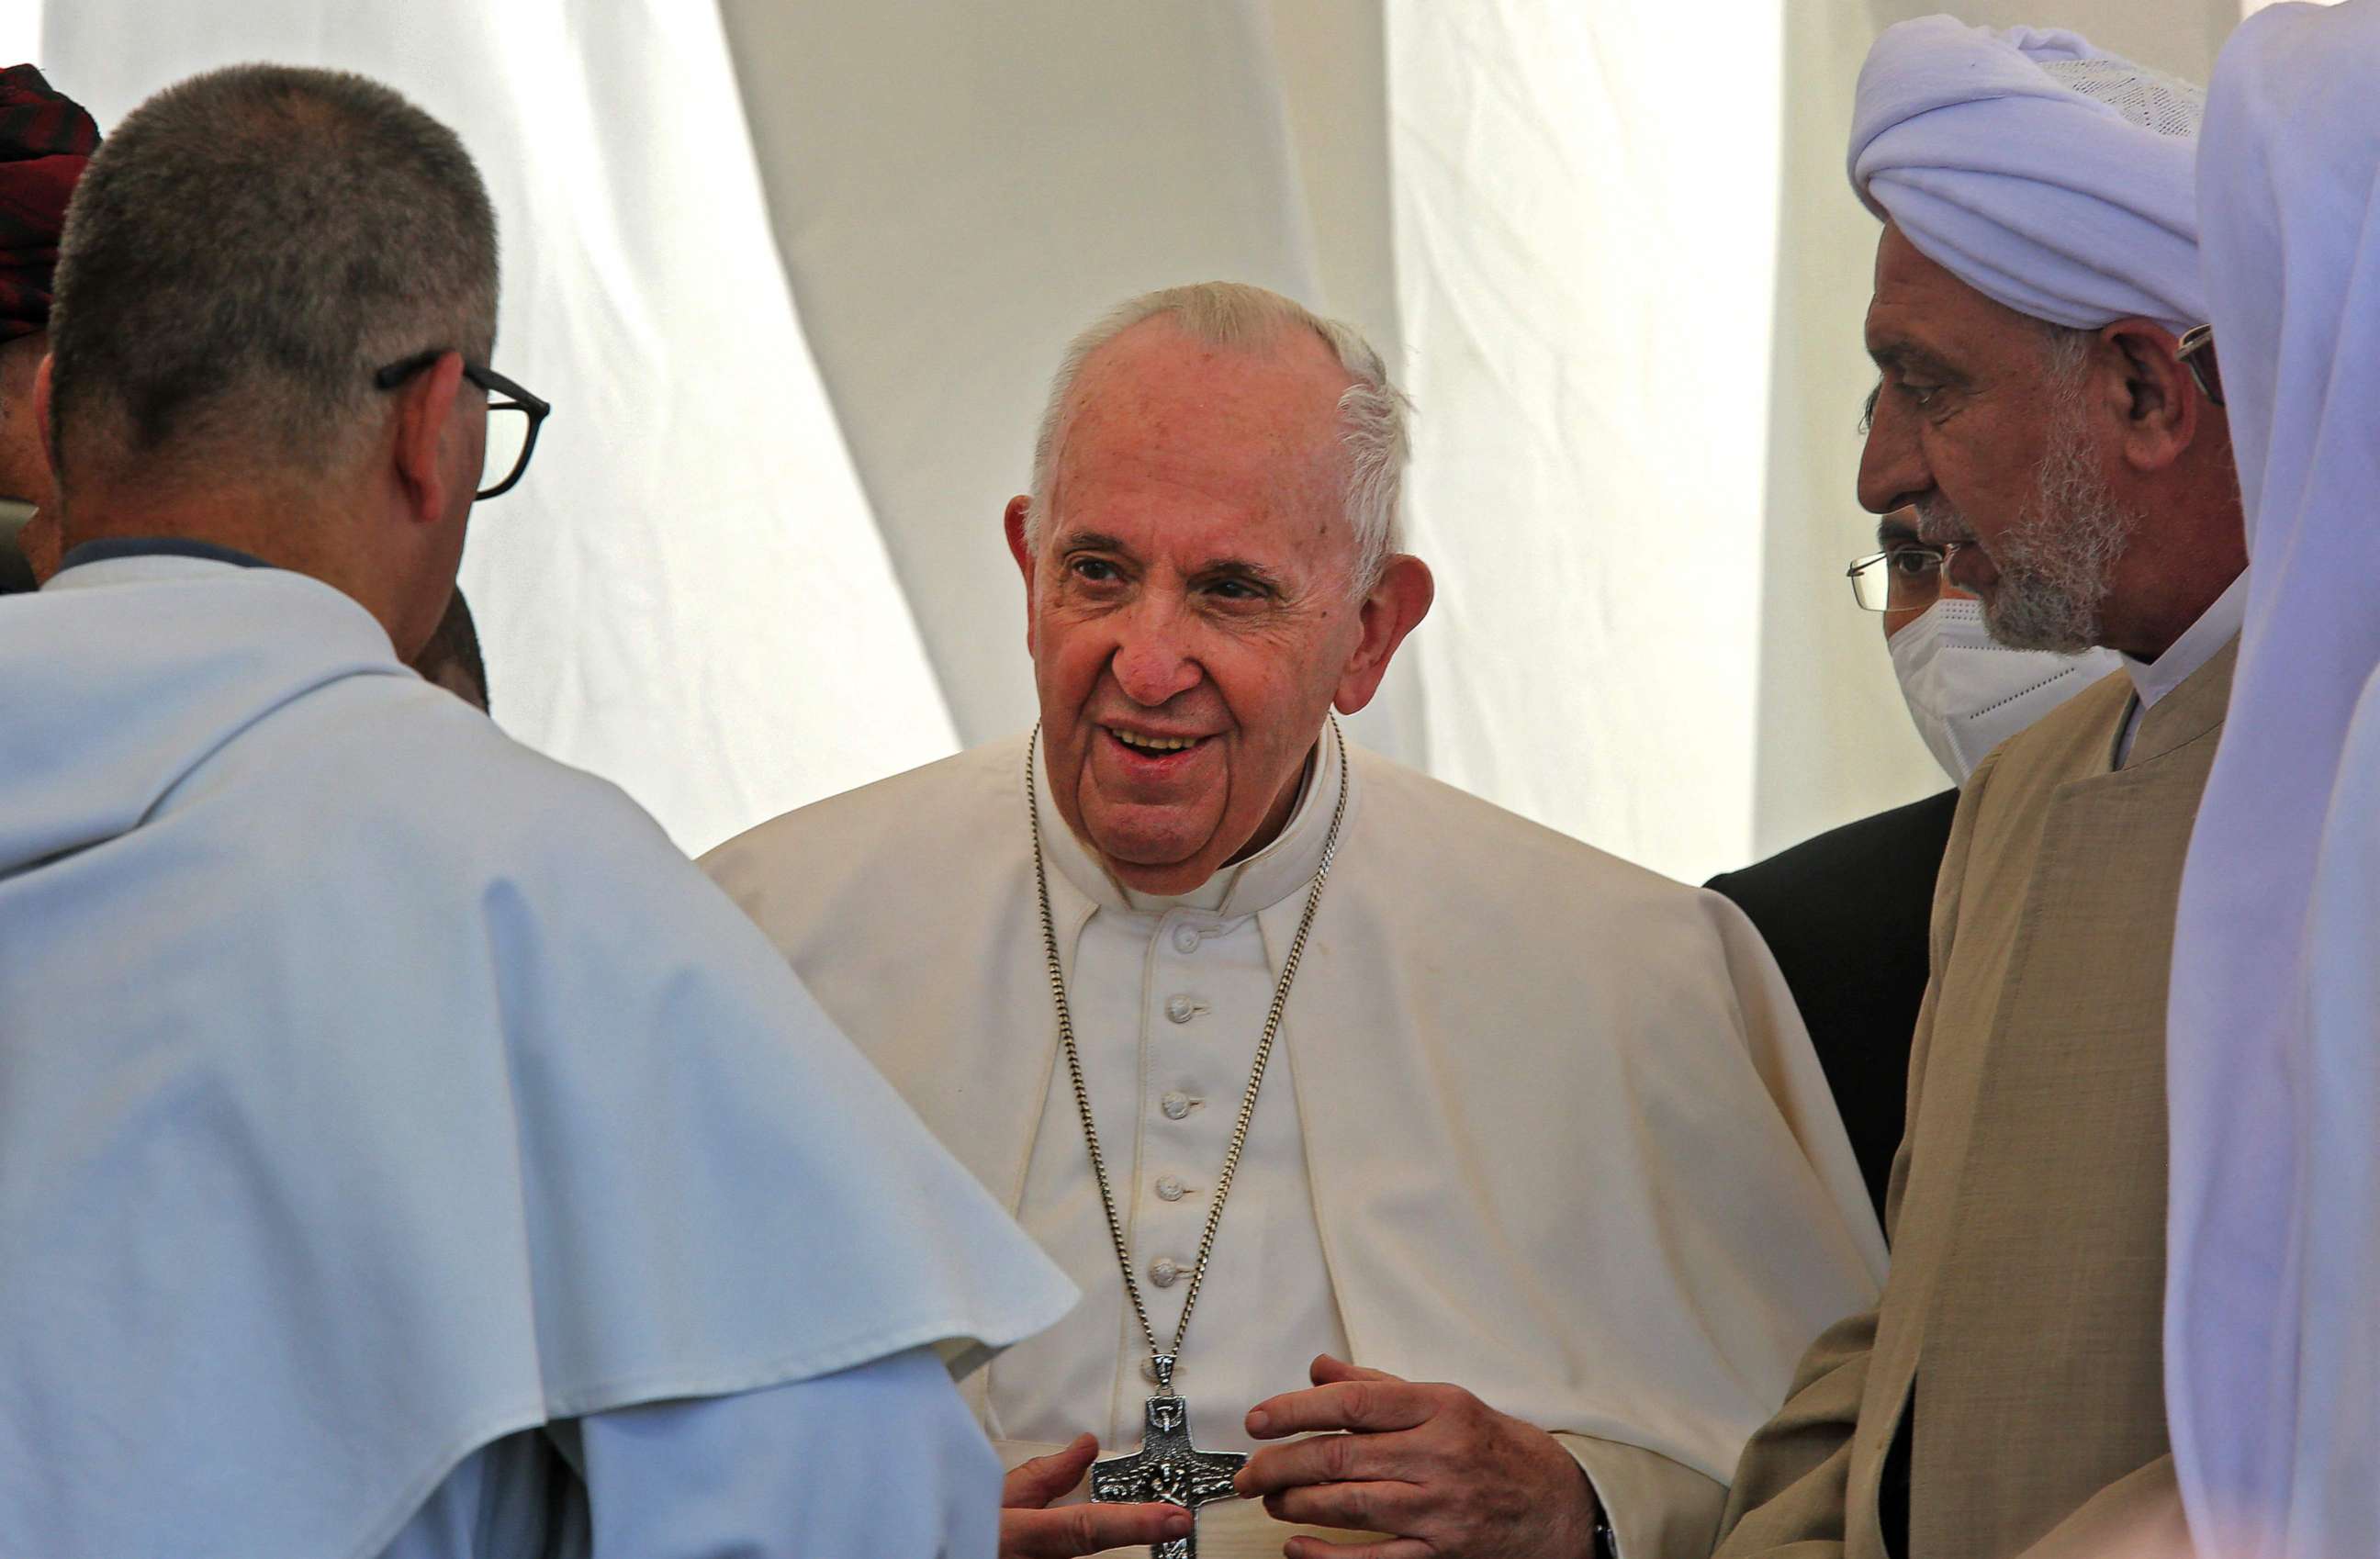 PHOTO: Pope Francis speaks with Iraqi religious figures during an interfaith service at the House of Abraham in the ancient city of Ur in southern Iraq's Dhi Qar province, on March 6, 2021.